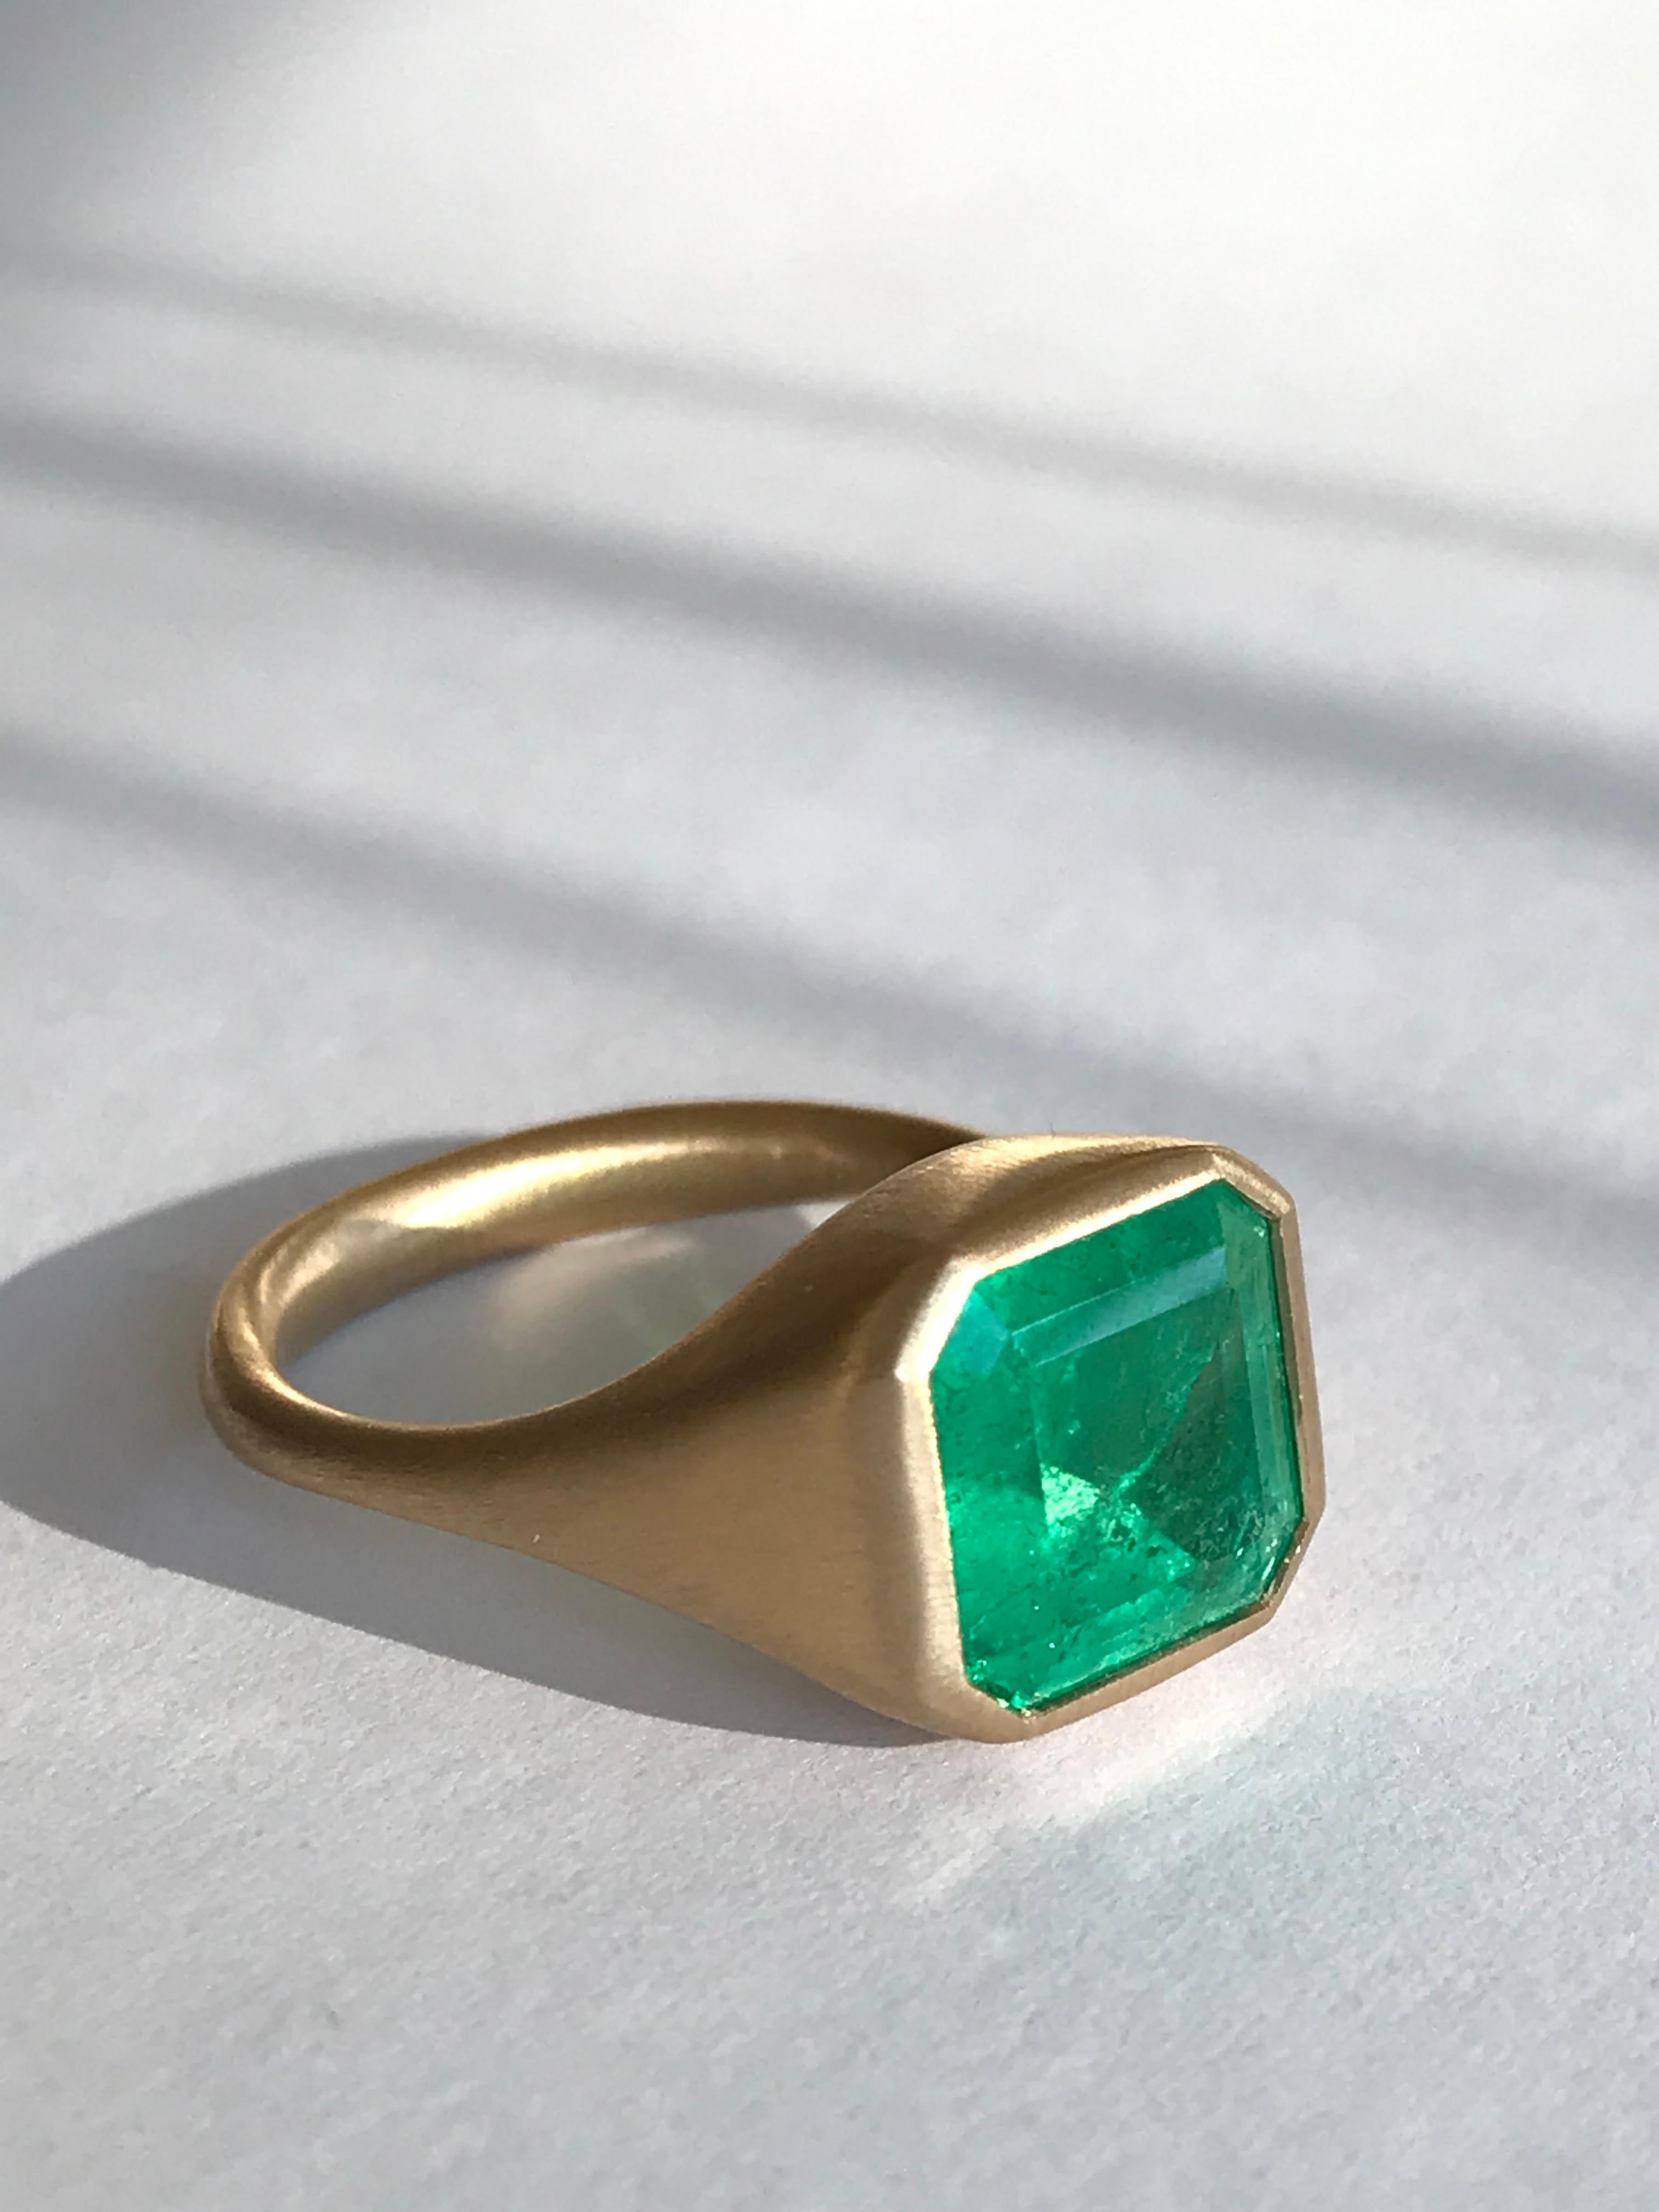 Dalben 4, 12 Carat Colombian Emerald Yellow Gold Ring For Sale 8